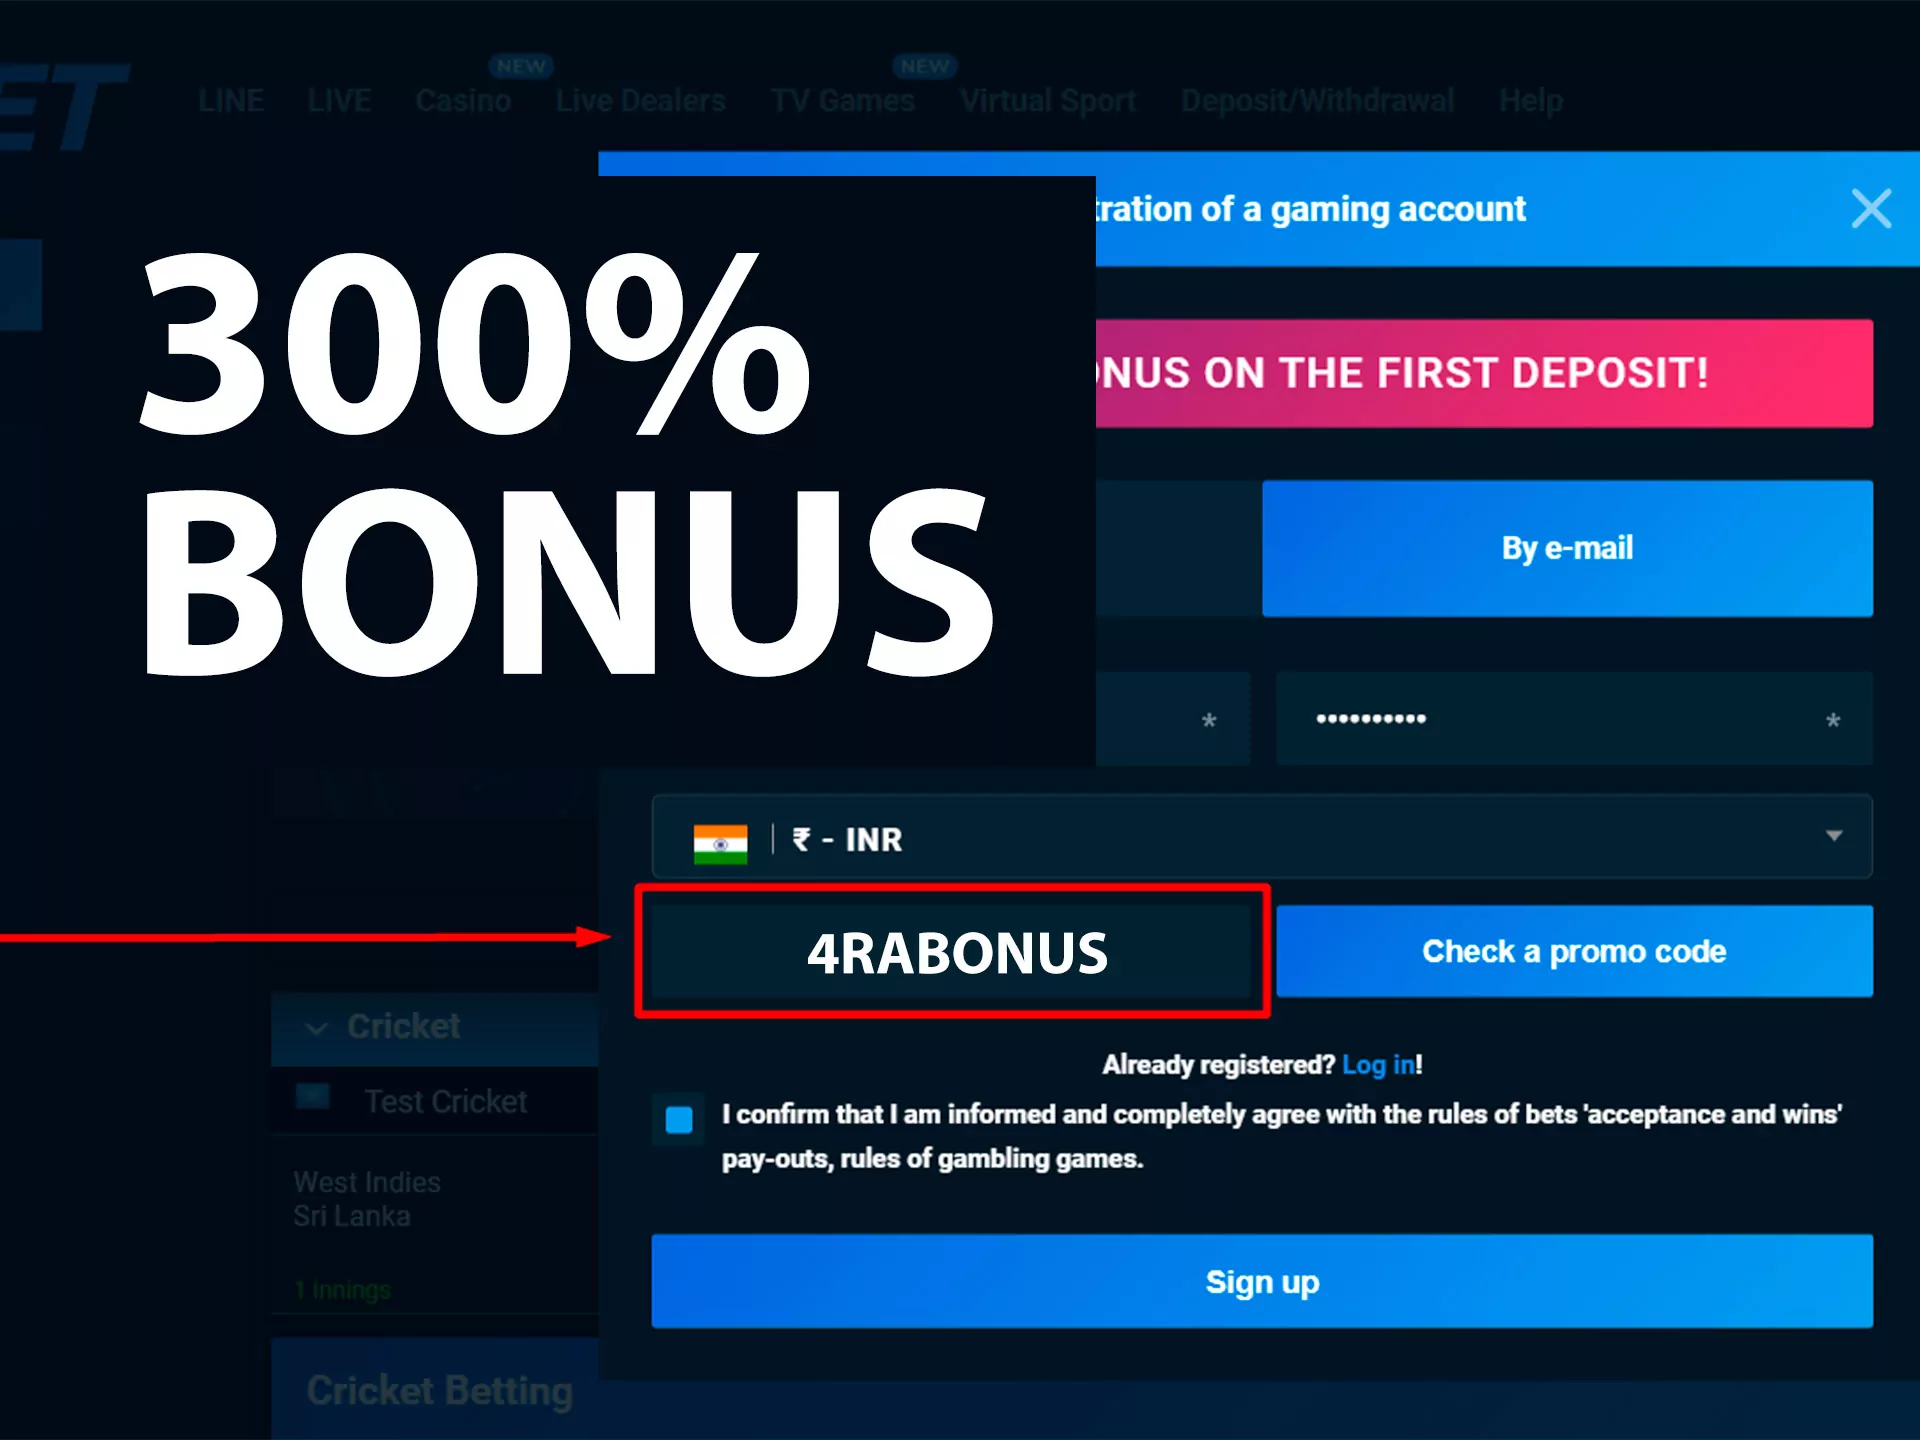 Enter our promo code while registering and get 300% bonus on your deposit.